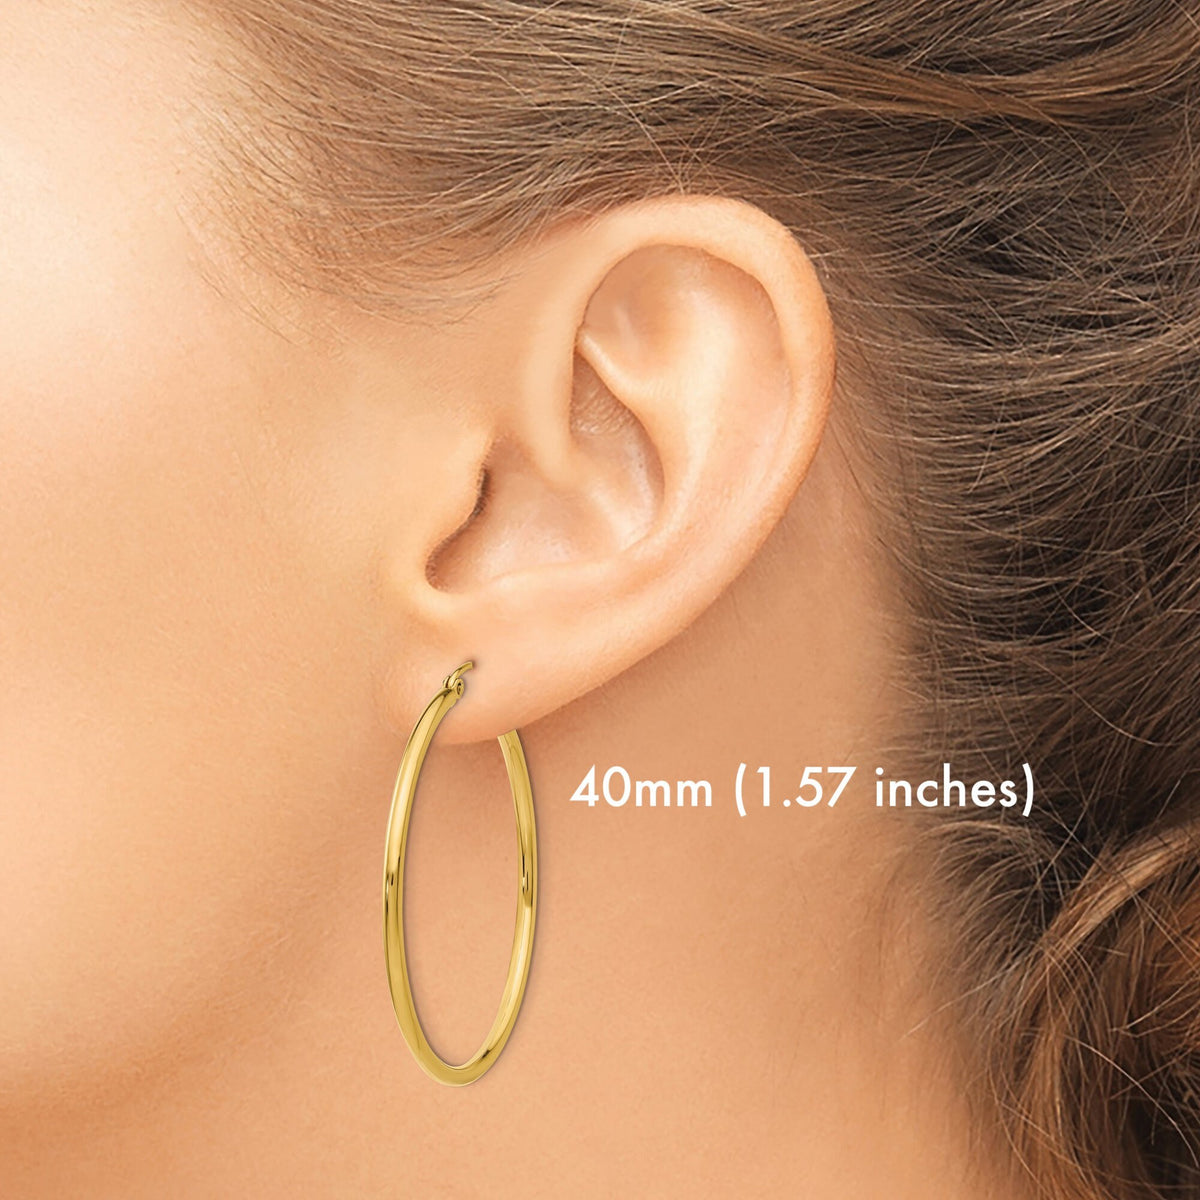 14k Yellow Gold Classic Hoops with Wire Clutch - Polished 2mm Yellow Gold Earrings (Not Plated or Filled) Gift Box Included - Ships Next Day